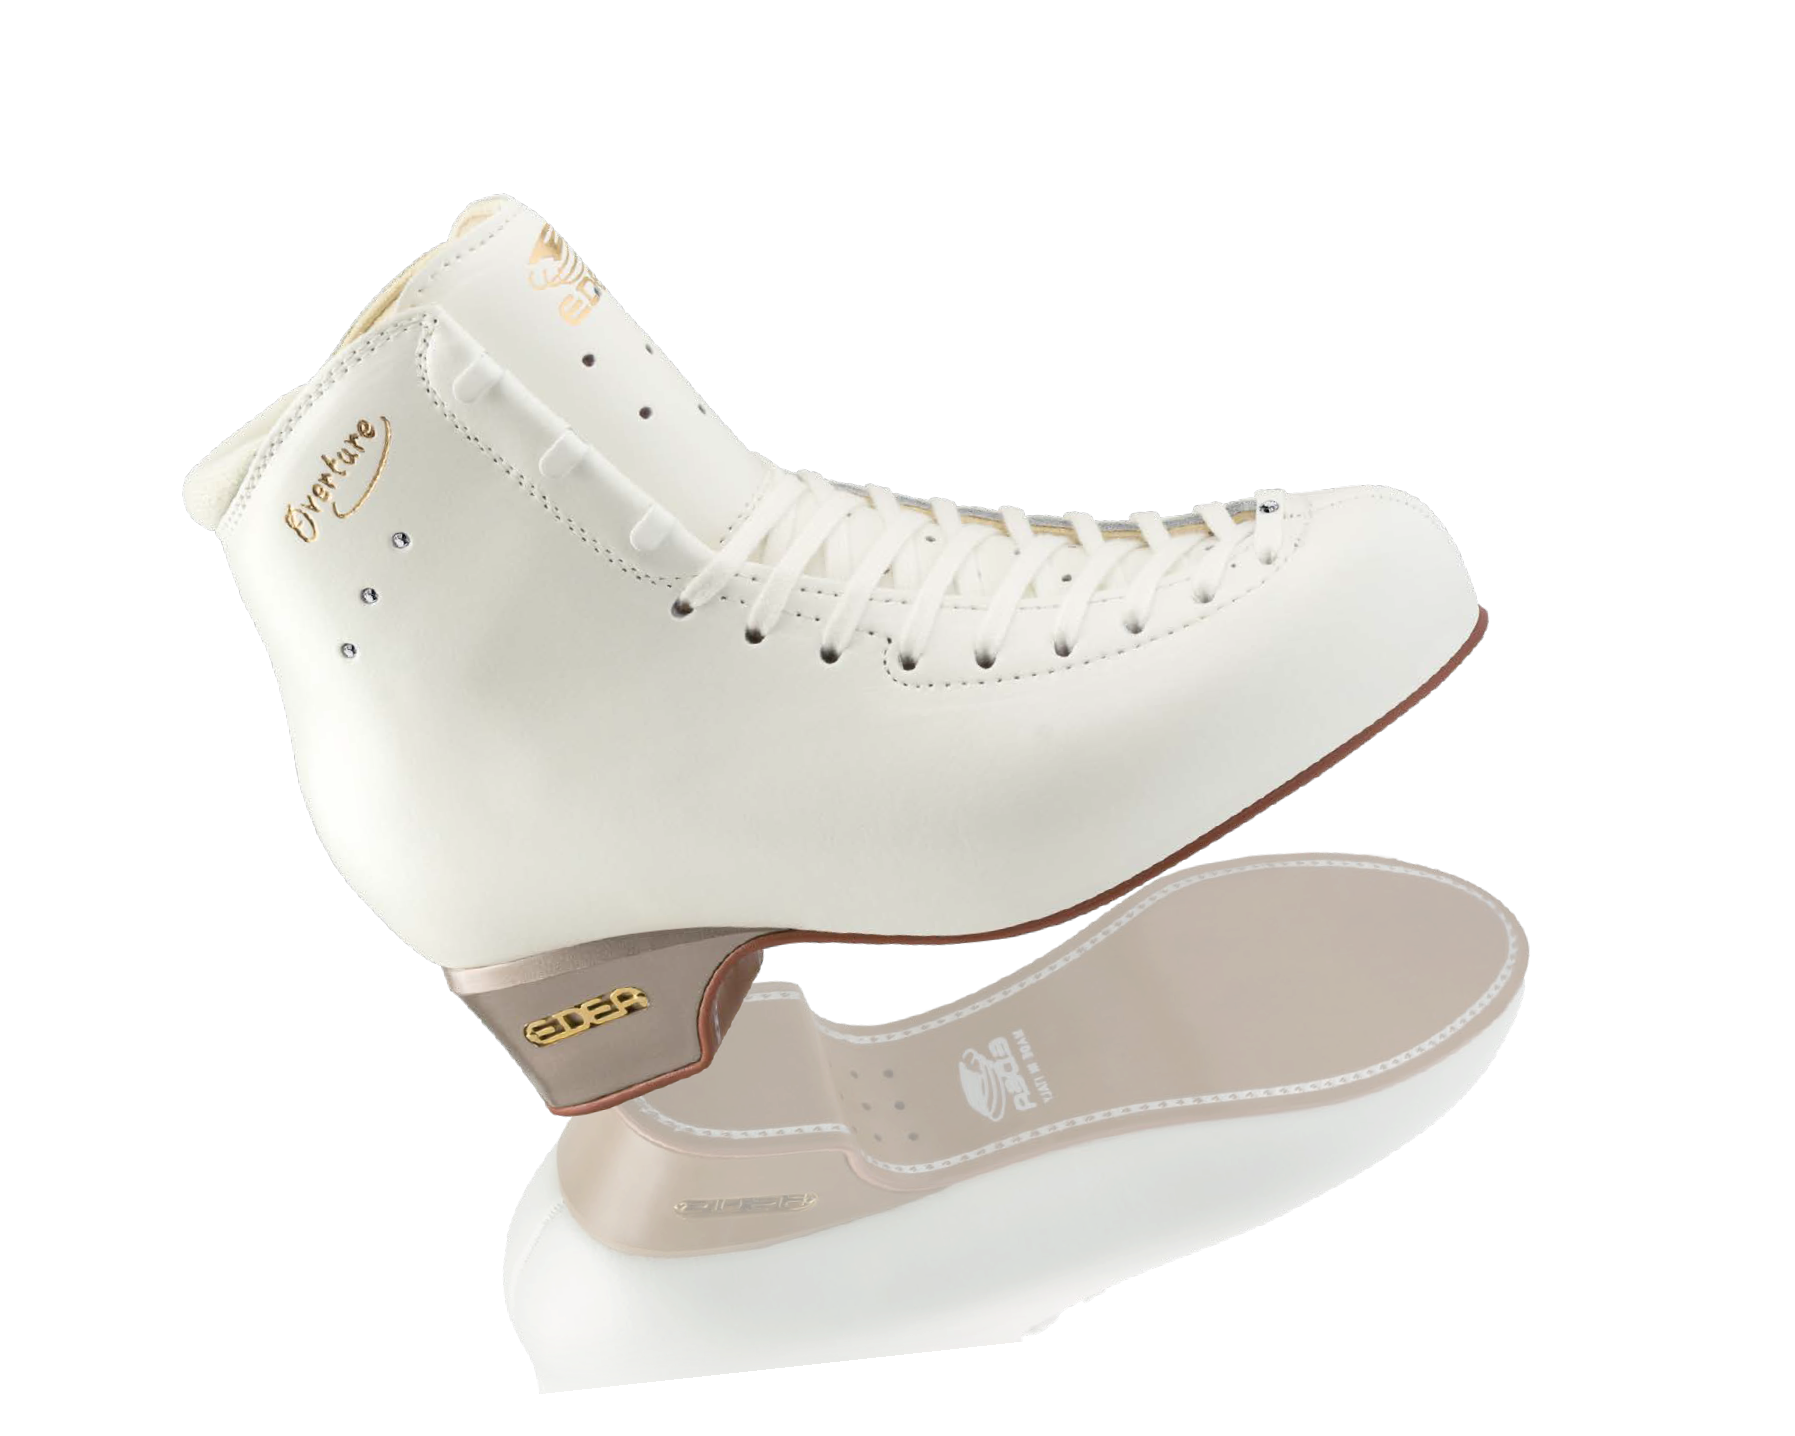 EDEA Skates : ChowSkates, An Online Store for Ice Skaters